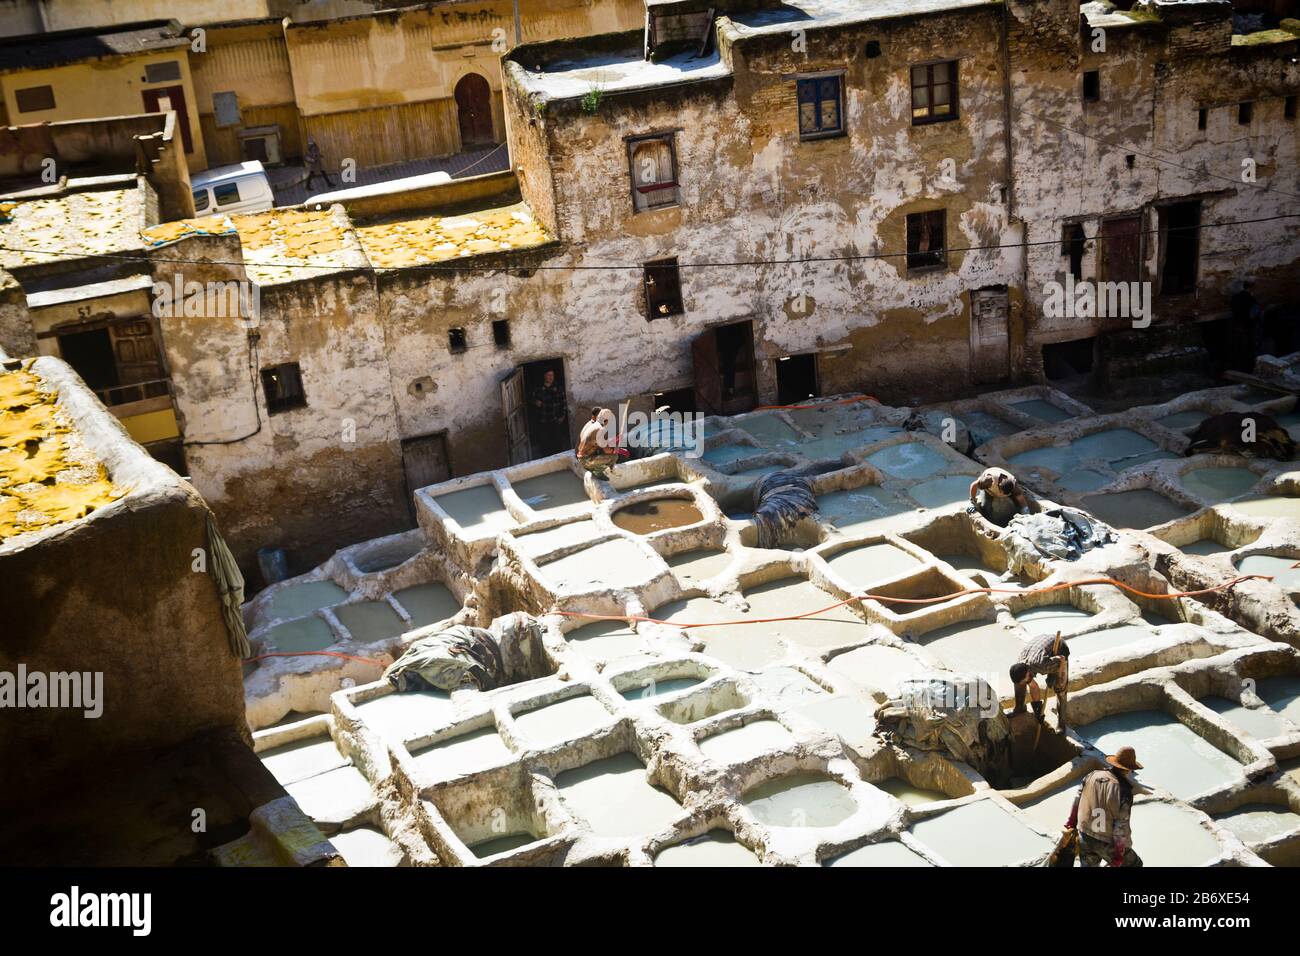 Workers wash and bleach leathers in the Tanners Quarter of Fes, Morocco Stock Photo